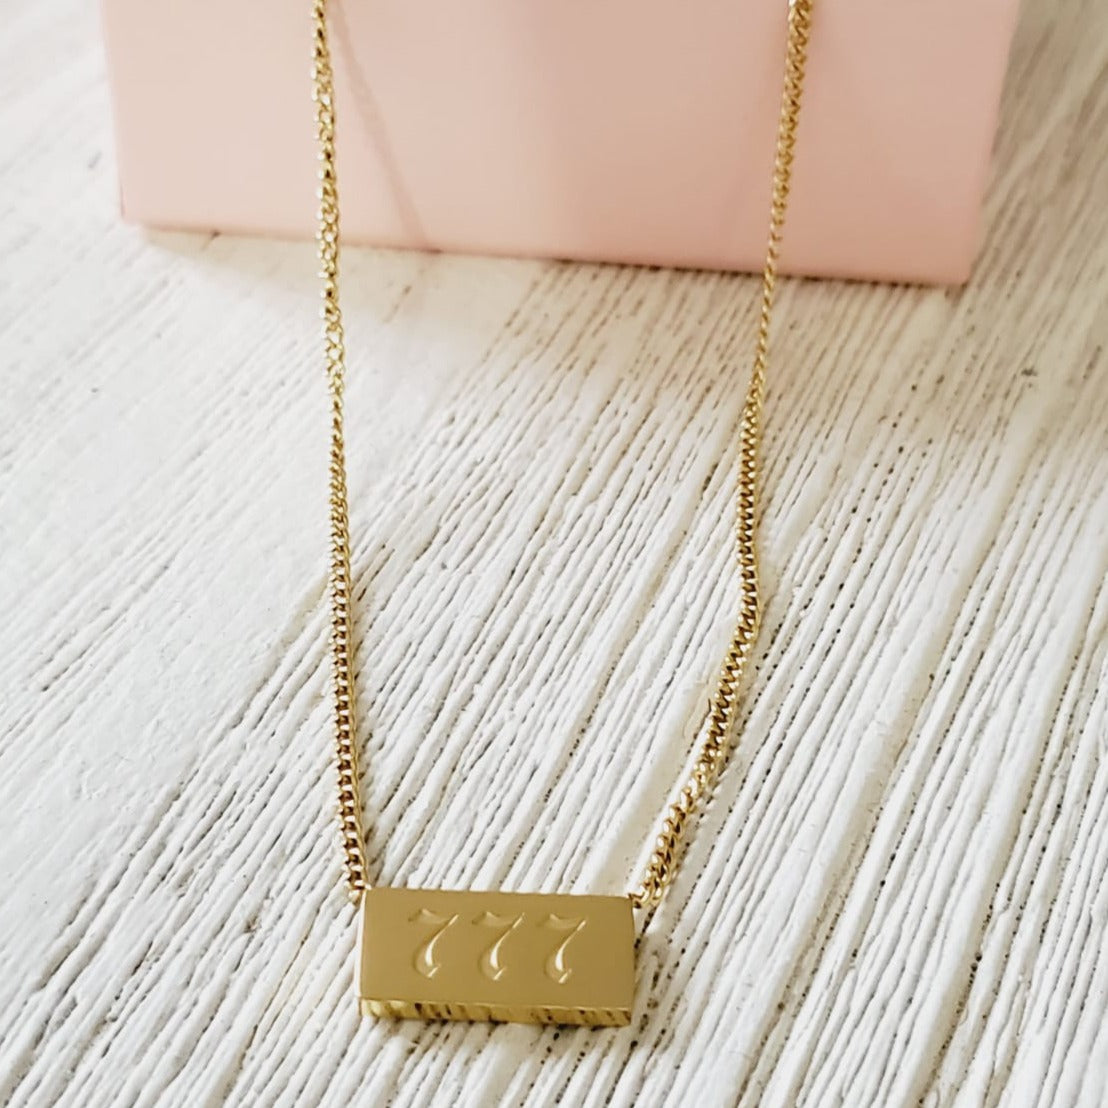 angel numbers necklace, angel numbers jewelry, 111 necklace, 111 jewelry, 222 necklace, 222 jewelry, 333 necklace, 333 jewelry, 444 necklace, 444 jewelry, 555 necklace, 555 jewelry, 777 necklace, 777 jewelry, 888 necklace, 888 jewelry, 999 necklace, 999 jewelry, 000 necklace, 000 jewelry, manifestation jewelry, manifestation necklace, abundance necklace, abundance jewelry, spiritual jewelry, spiritual necklace, Make a Wish Necklace, Luck Necklace, Lucky Necklace